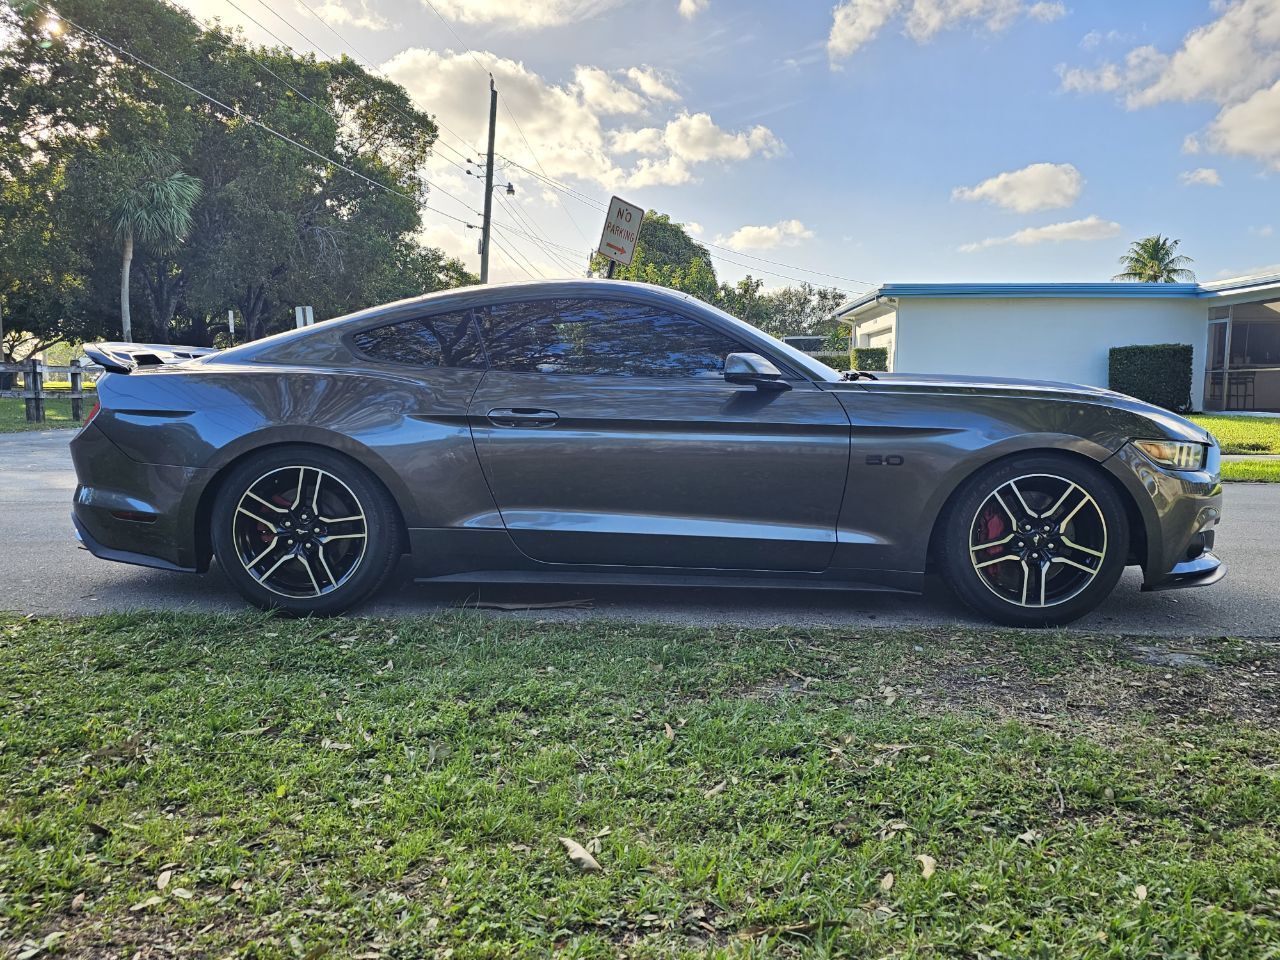 2015 FORD Mustang Coupe - $21,025